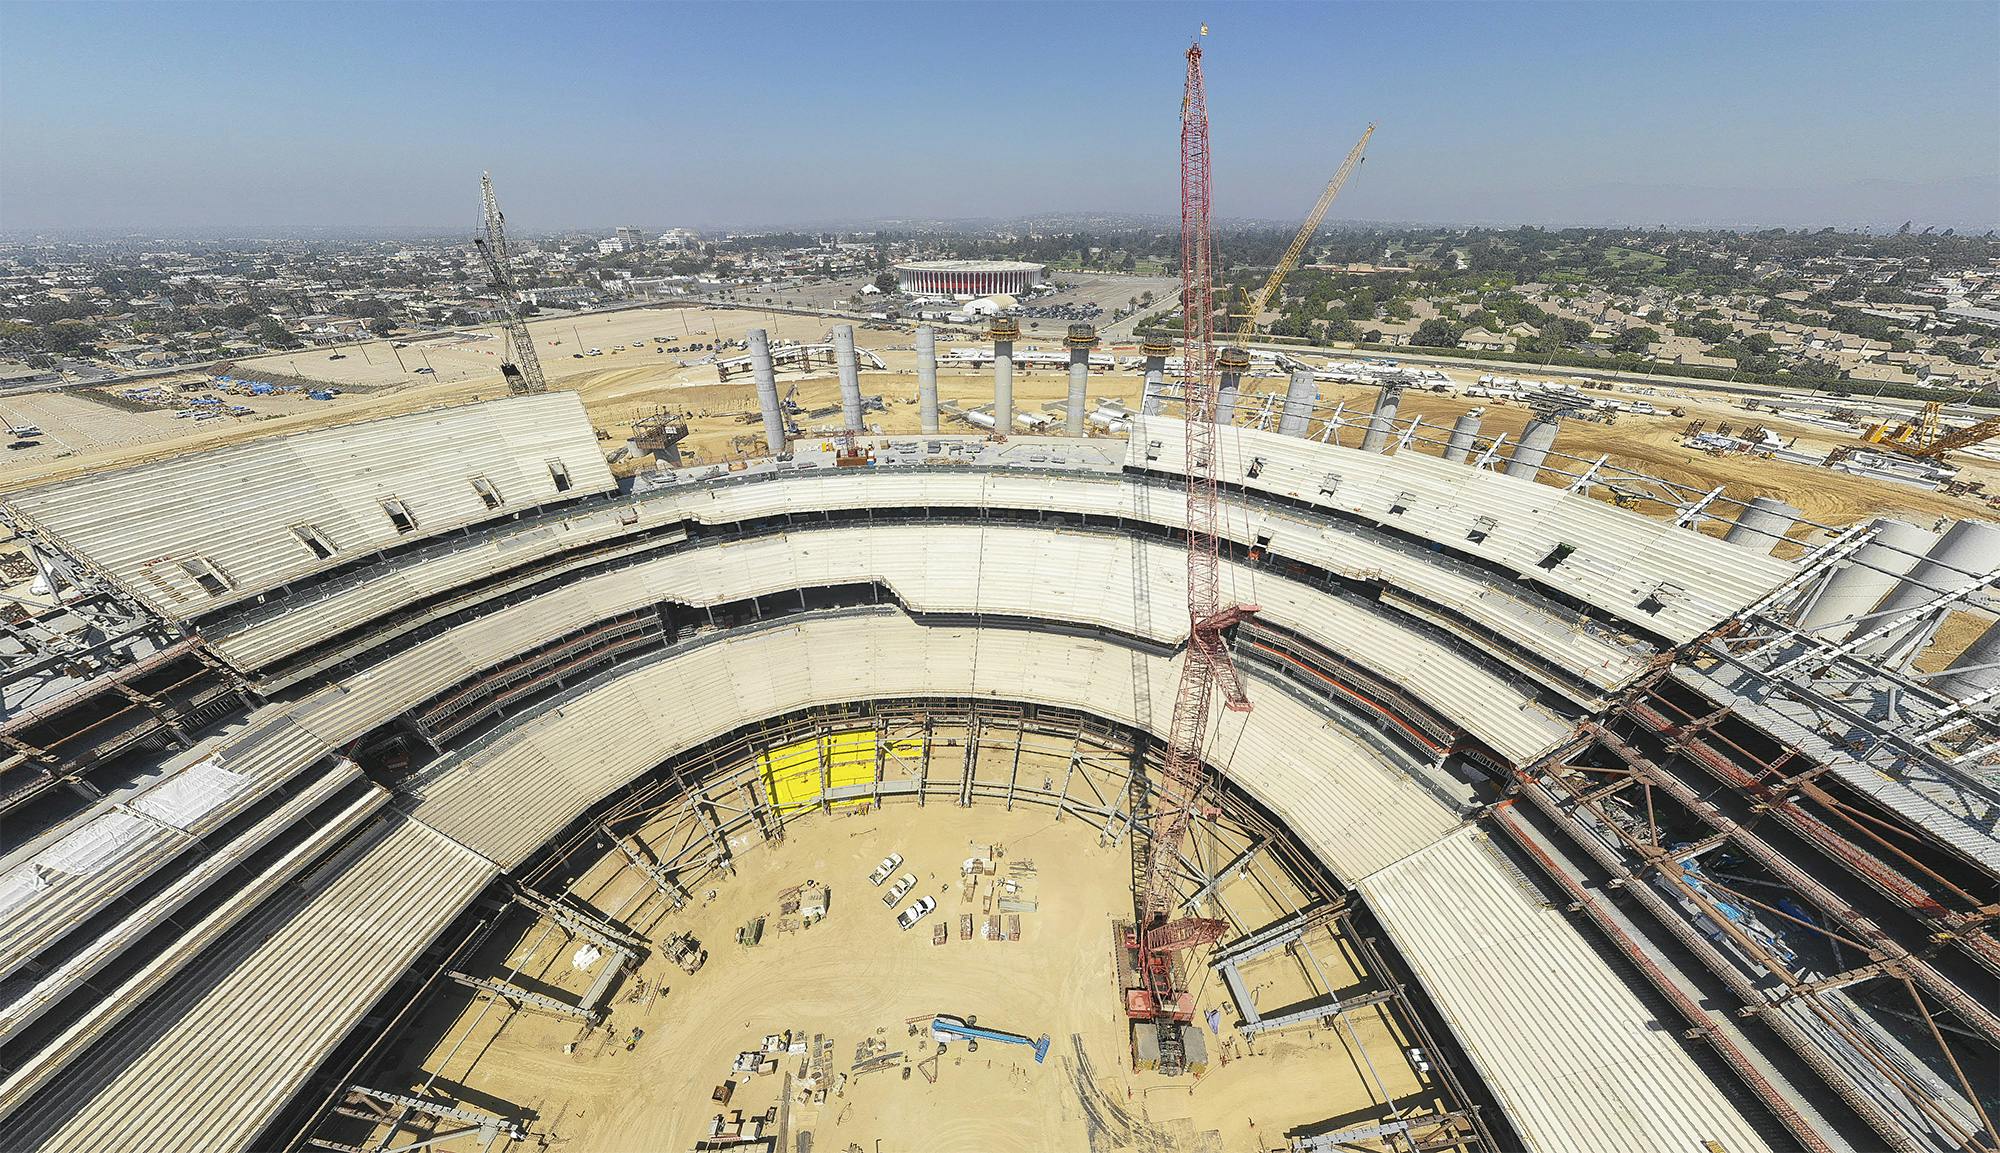 Construction update on L.A.'s new gigantic football stadium | News | Archinect